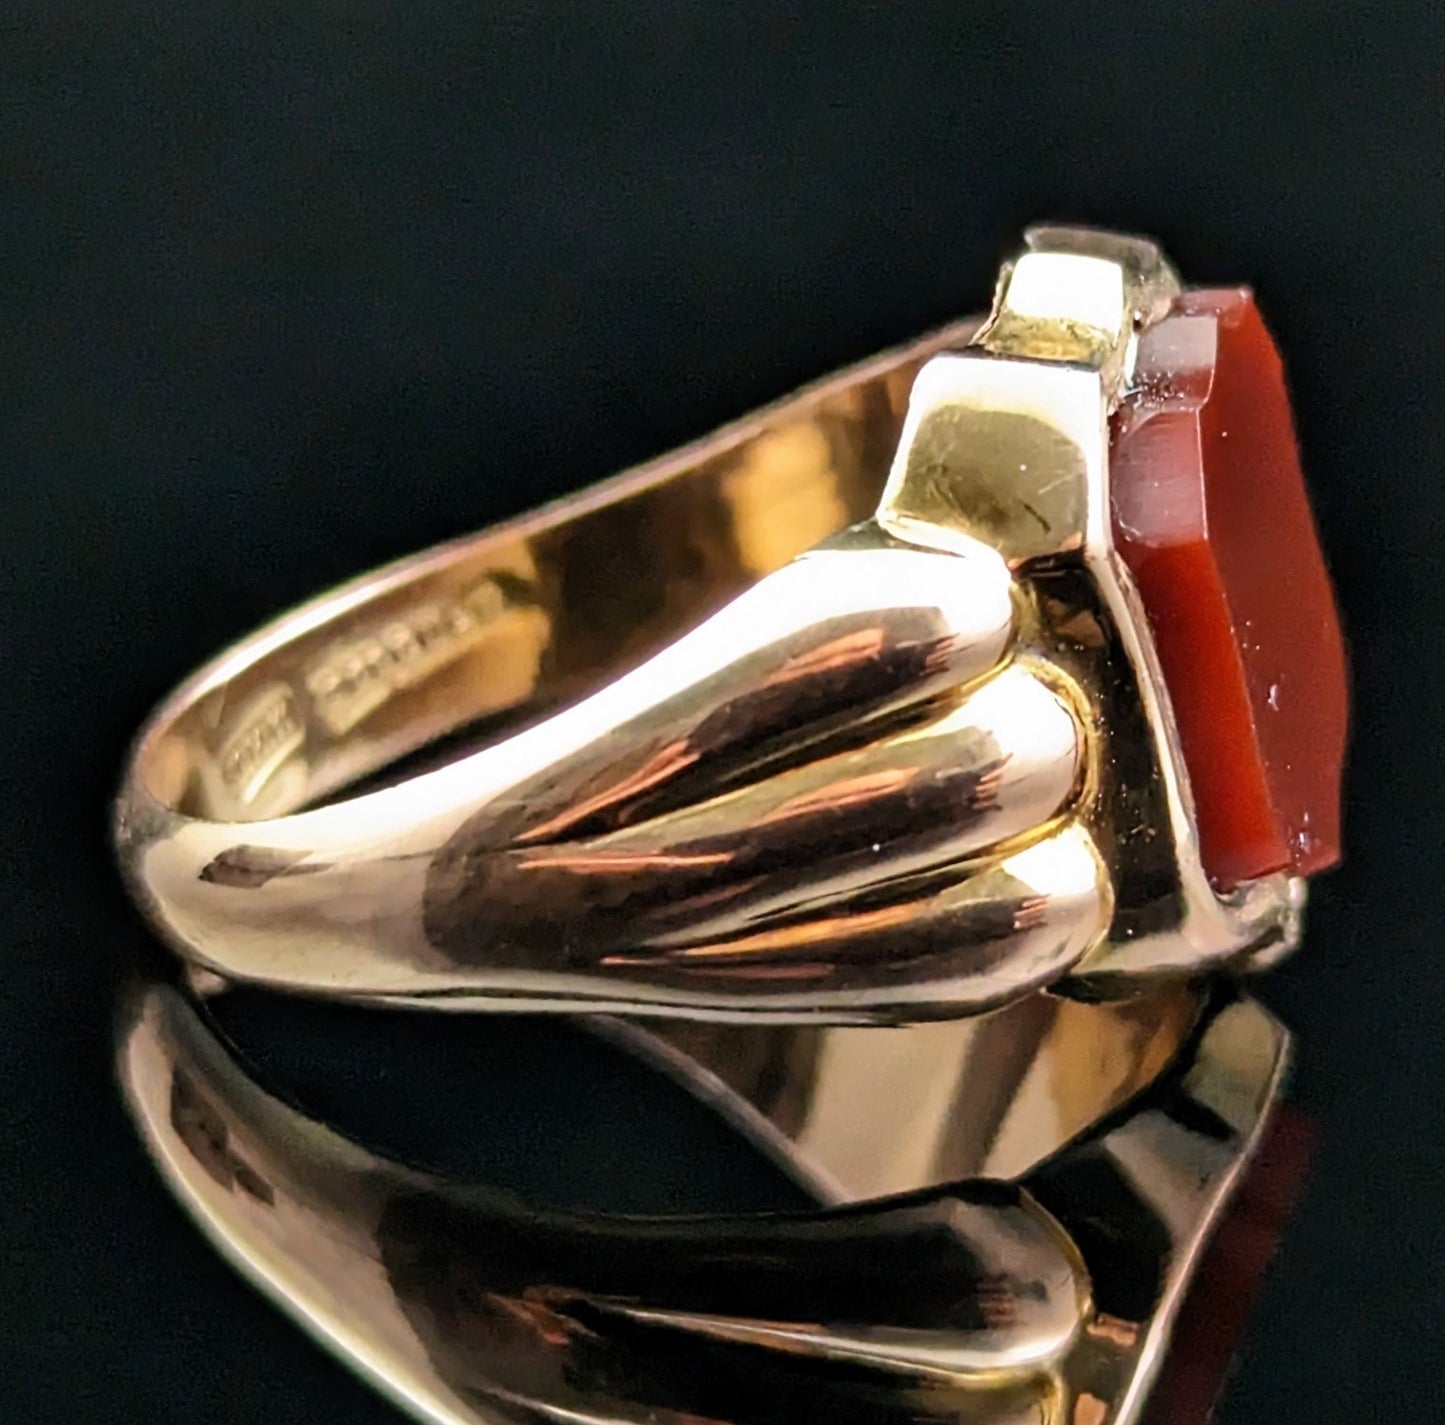 Antique Carnelian signet ring, 9ct gold, Shield shaped